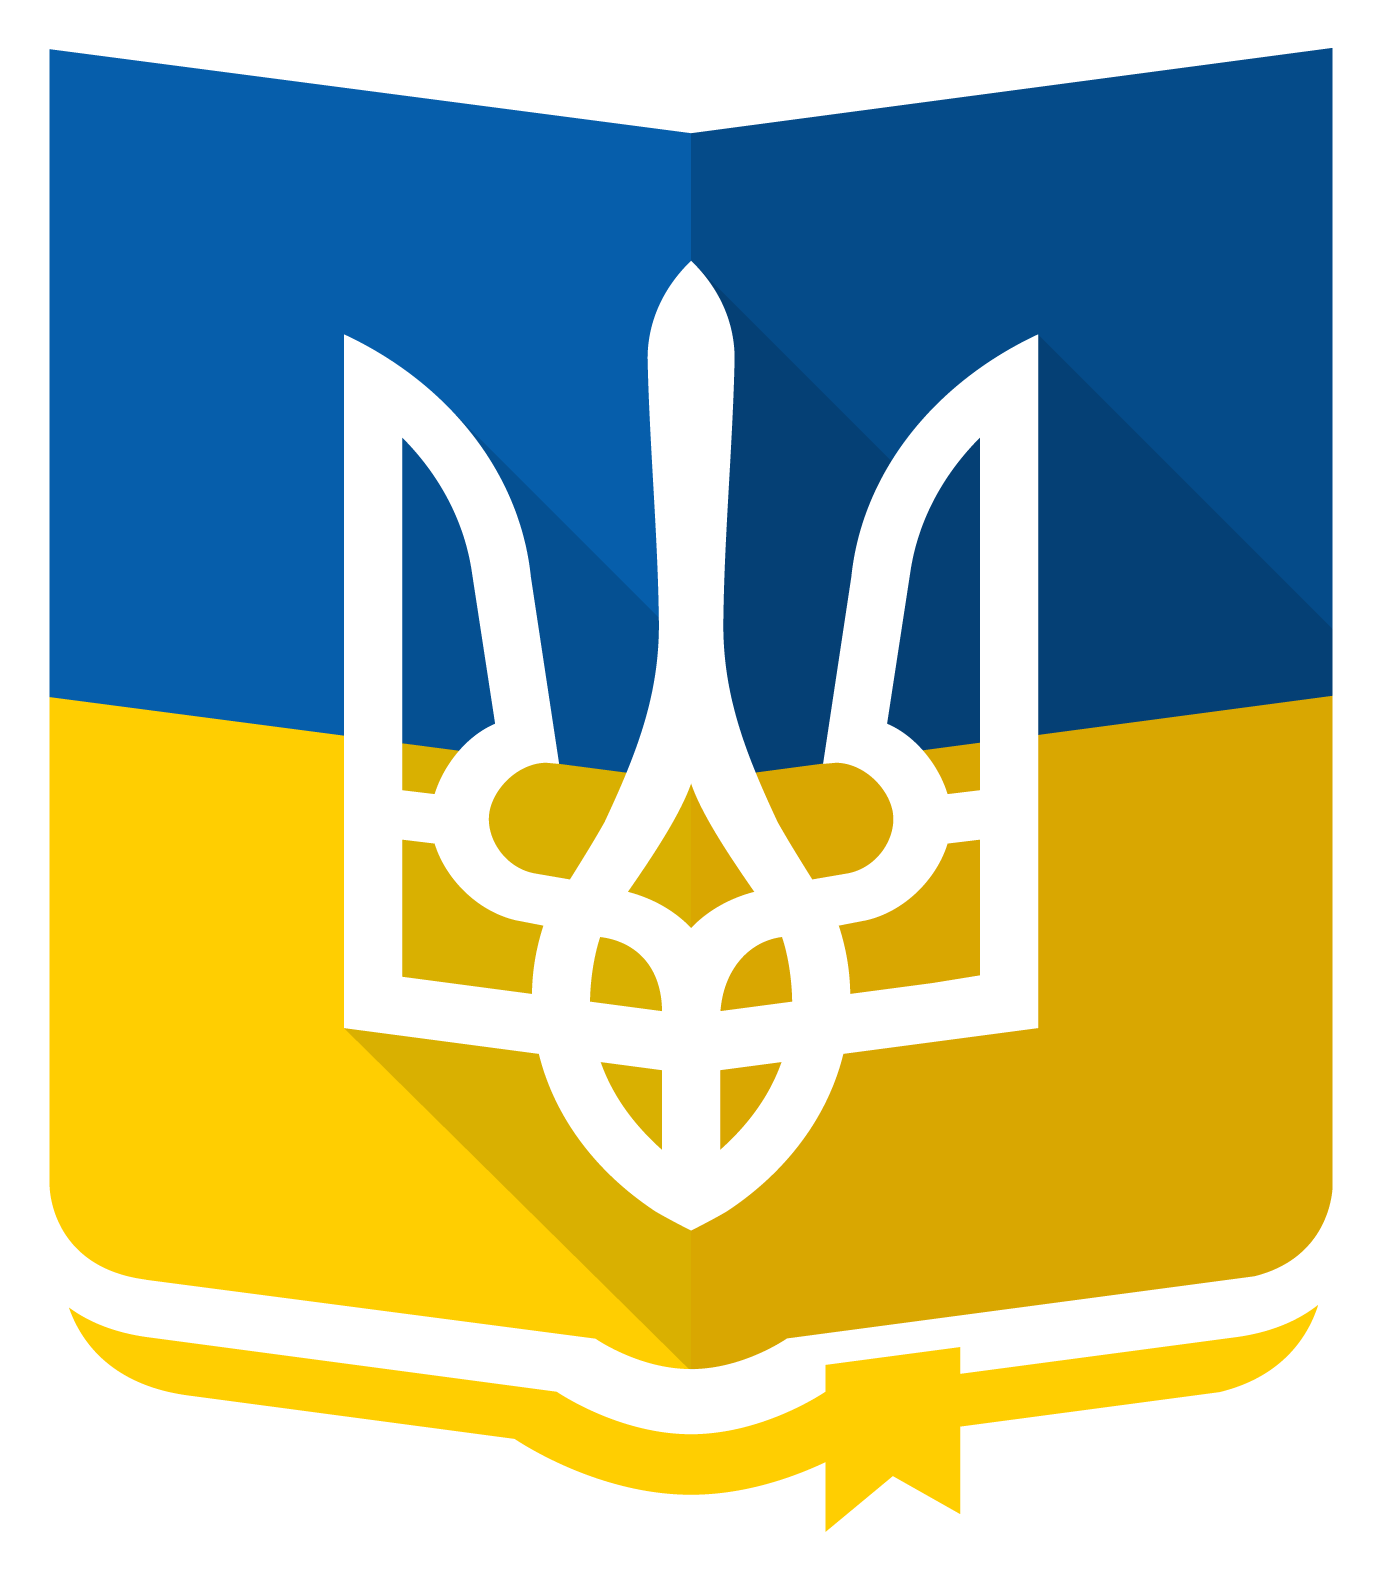 Ukraine Logo - File:Ministry of Education and Science of Ukraine logo.png ...